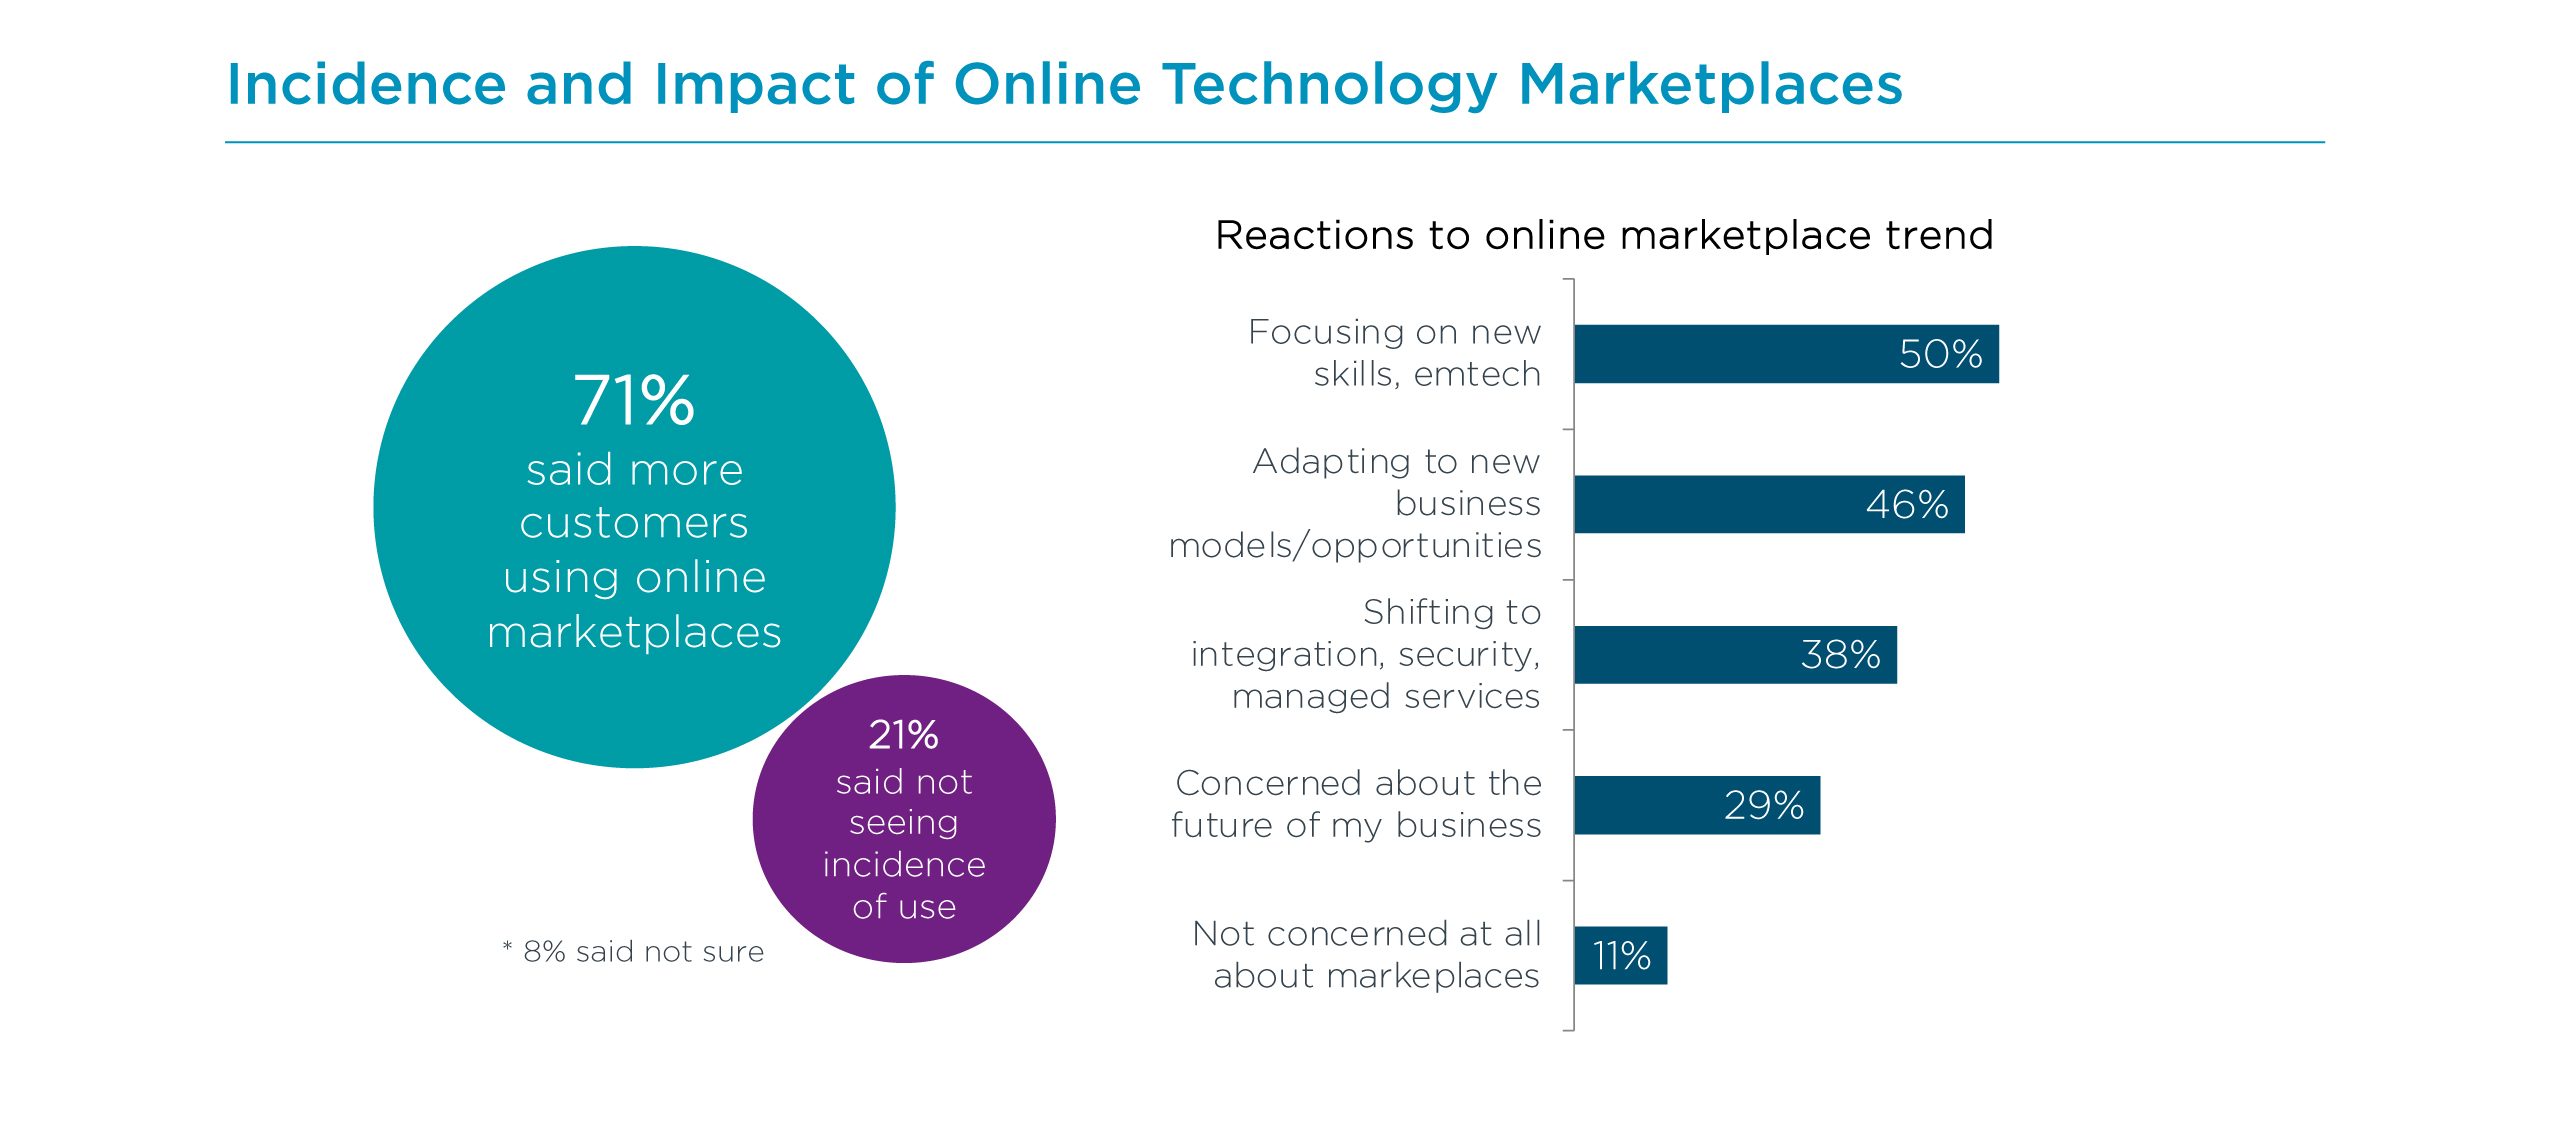 Incidence and Impact of Online Technology Marketplaces